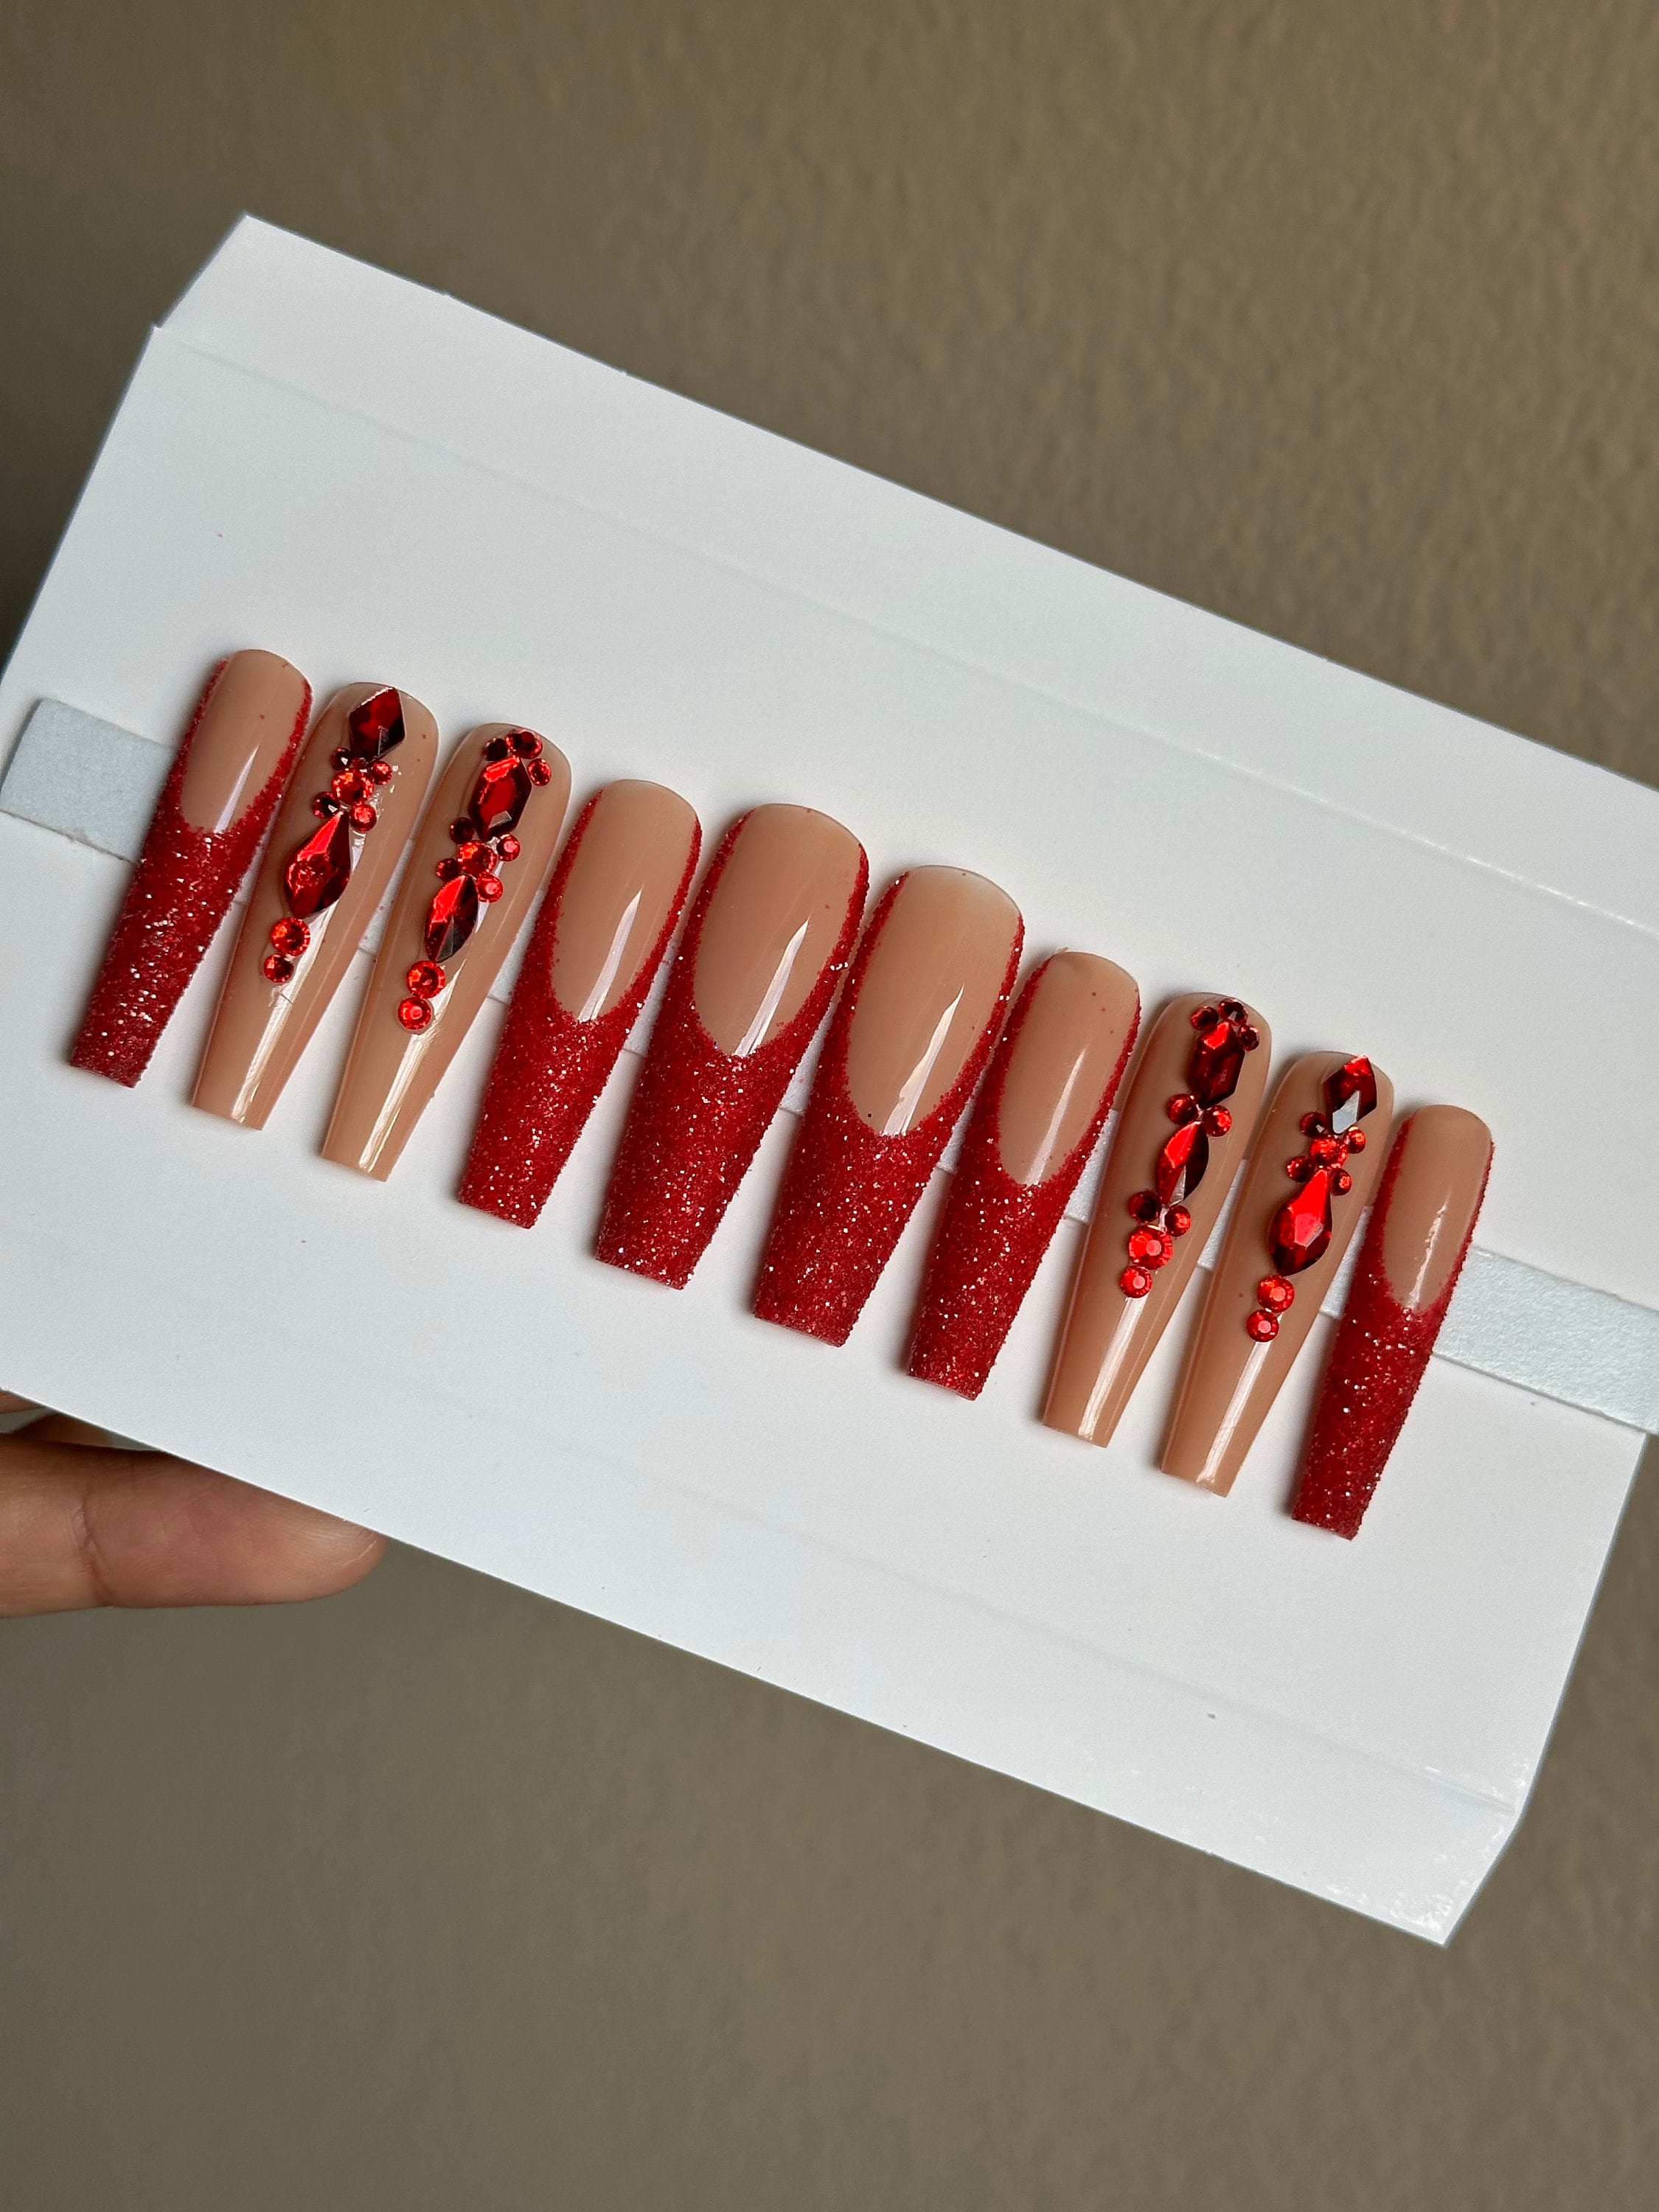 Red Glitter French Tip Nails Bling Nails Nude Nails Long Nails